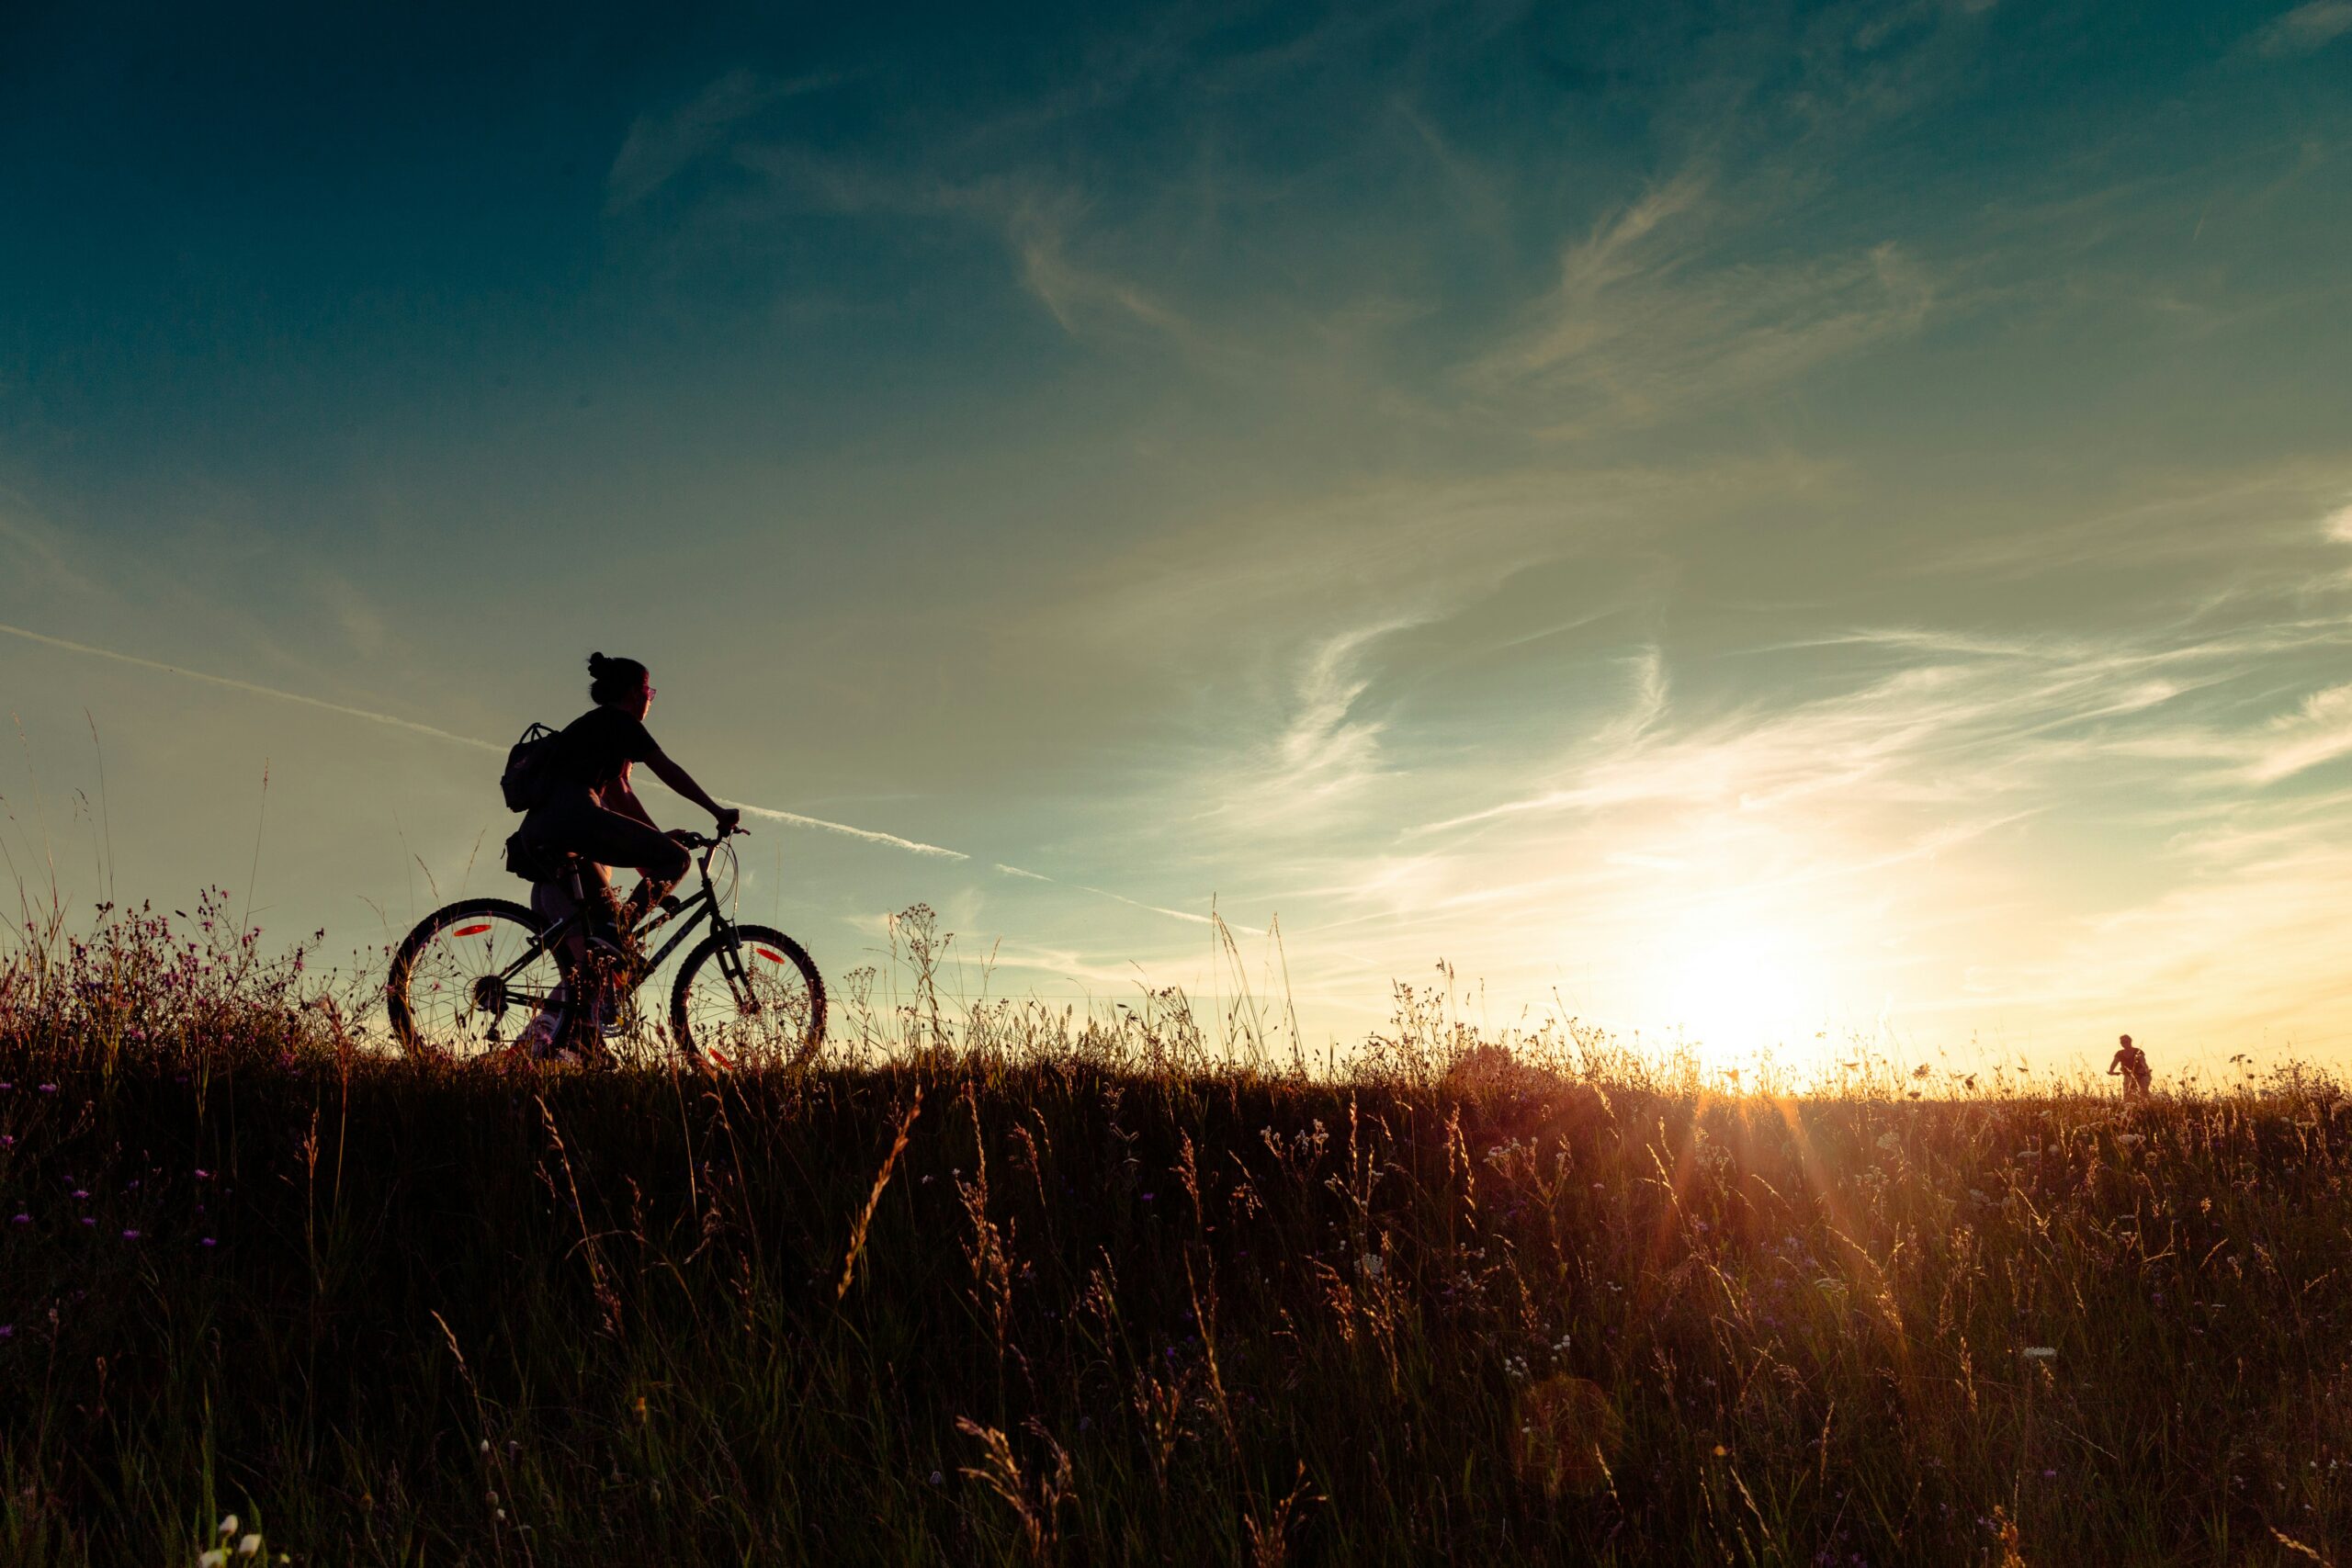 A person riding bike on trail through a grassy field with sunn setting.